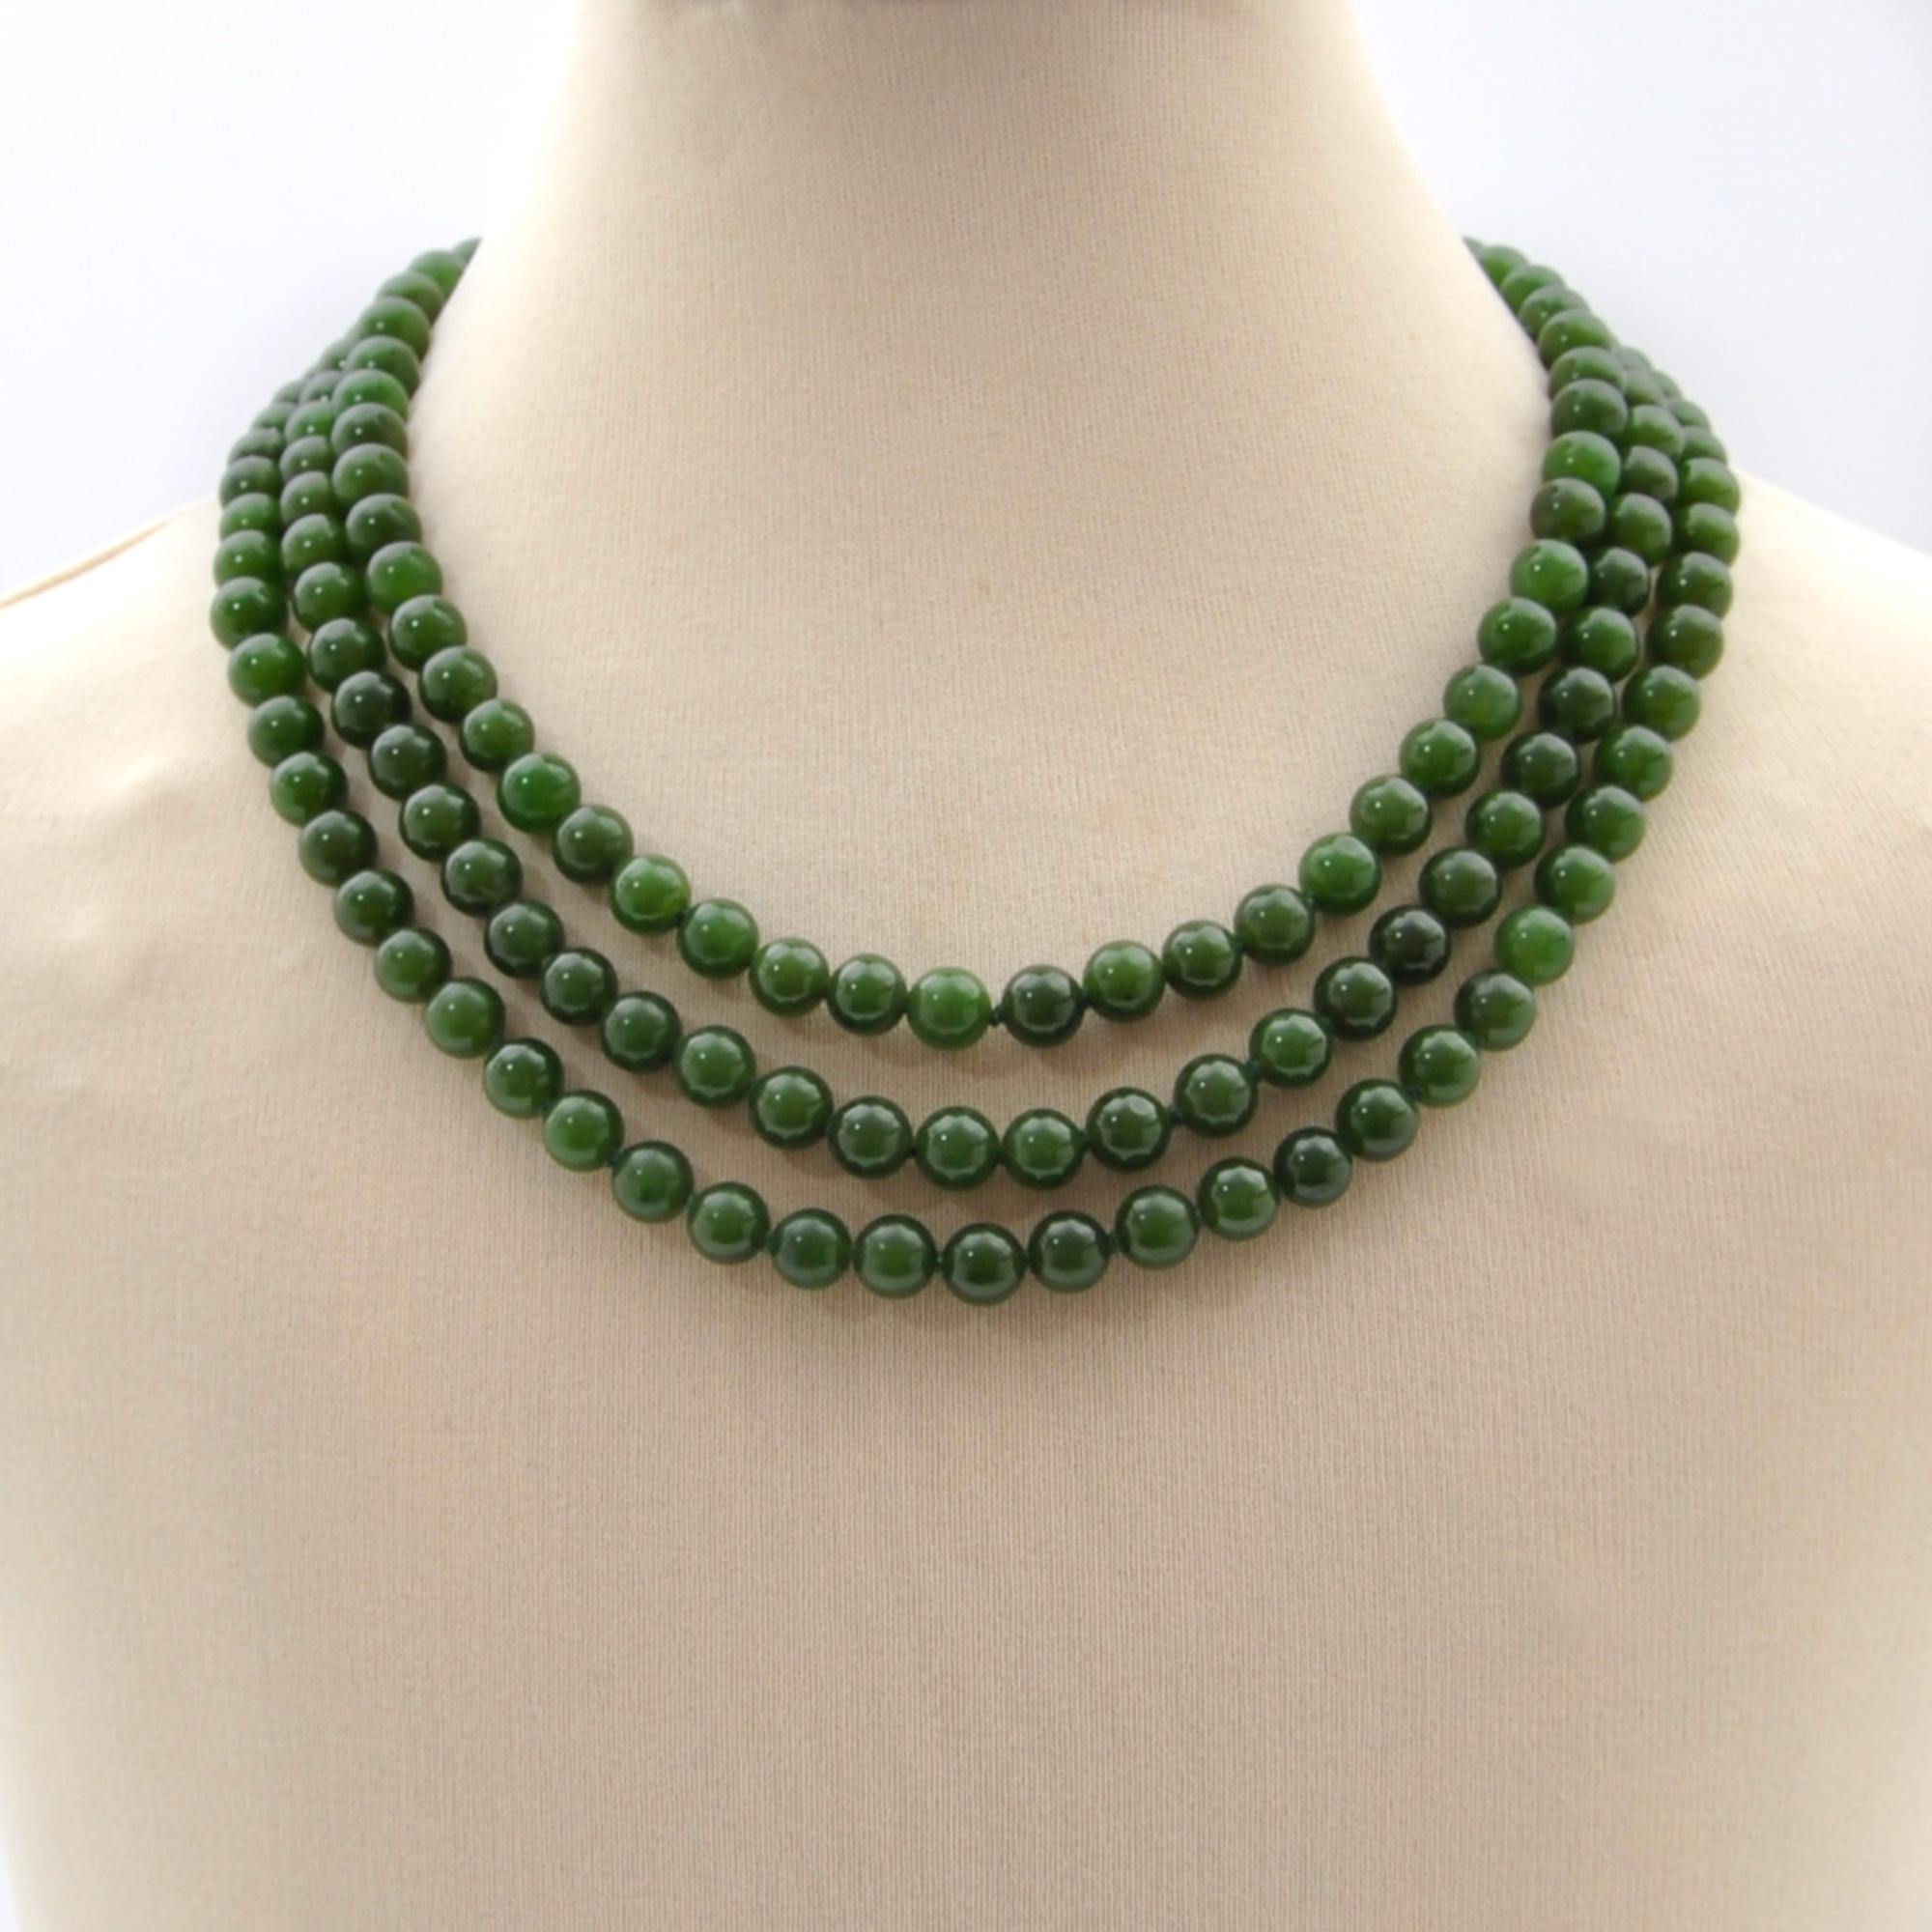 A mid-century dark green nephrite jade three-strand beaded necklace. The necklace consists of round-shaped nephrite jade stones. These jade beads have a very nice green color and are equally sized. To keep some space between the beads, the thread is